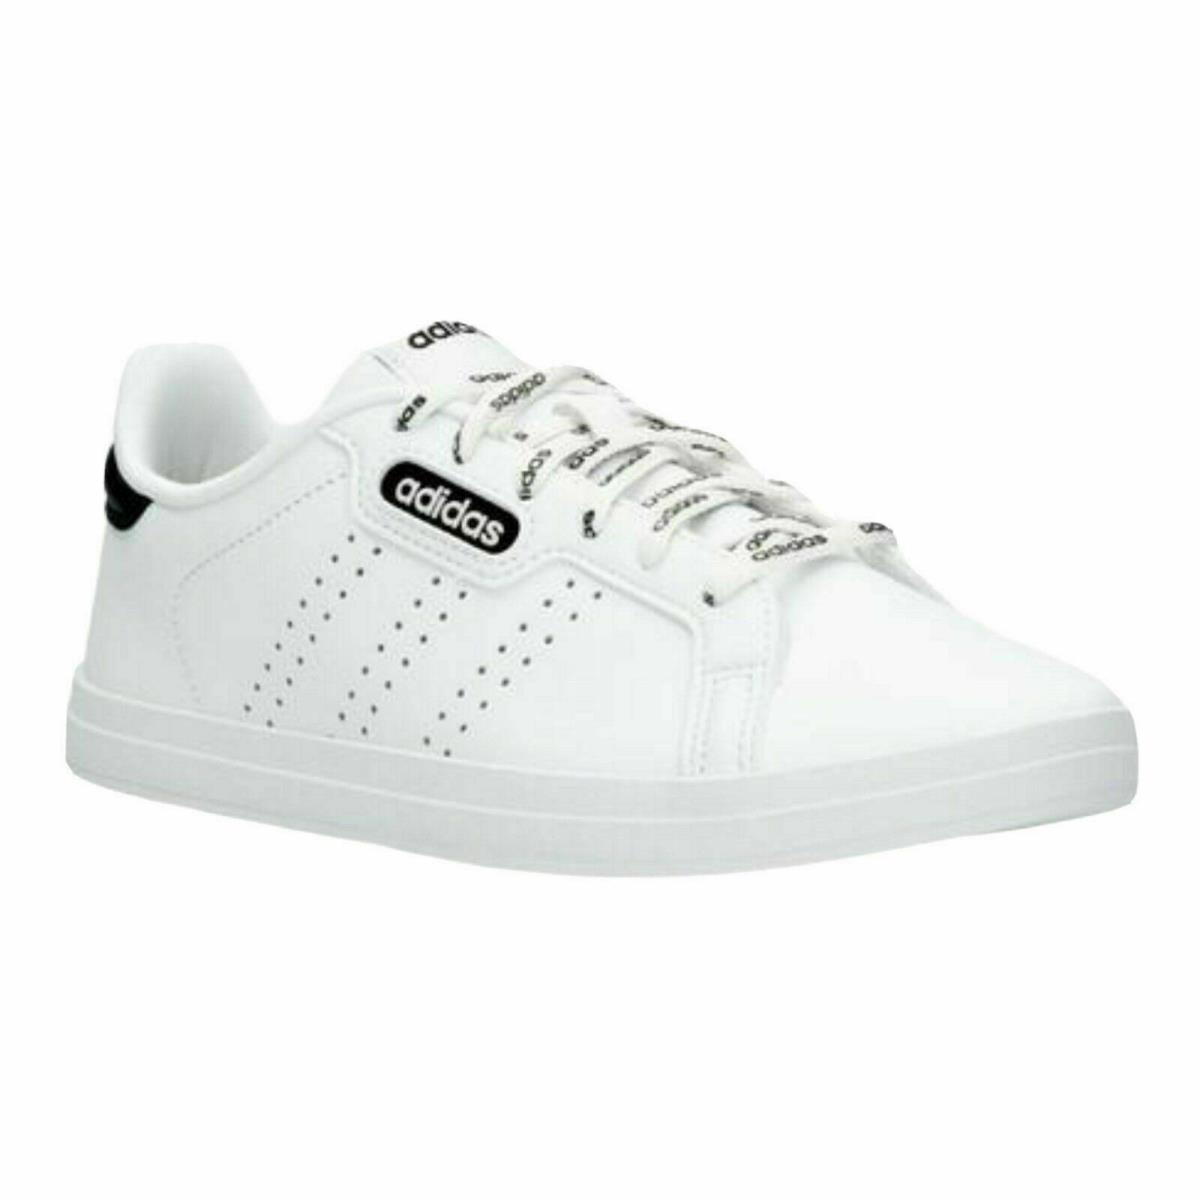 Adidas Ladie`s Courtpoint Base Tennis Athletic Sneaker Shoes